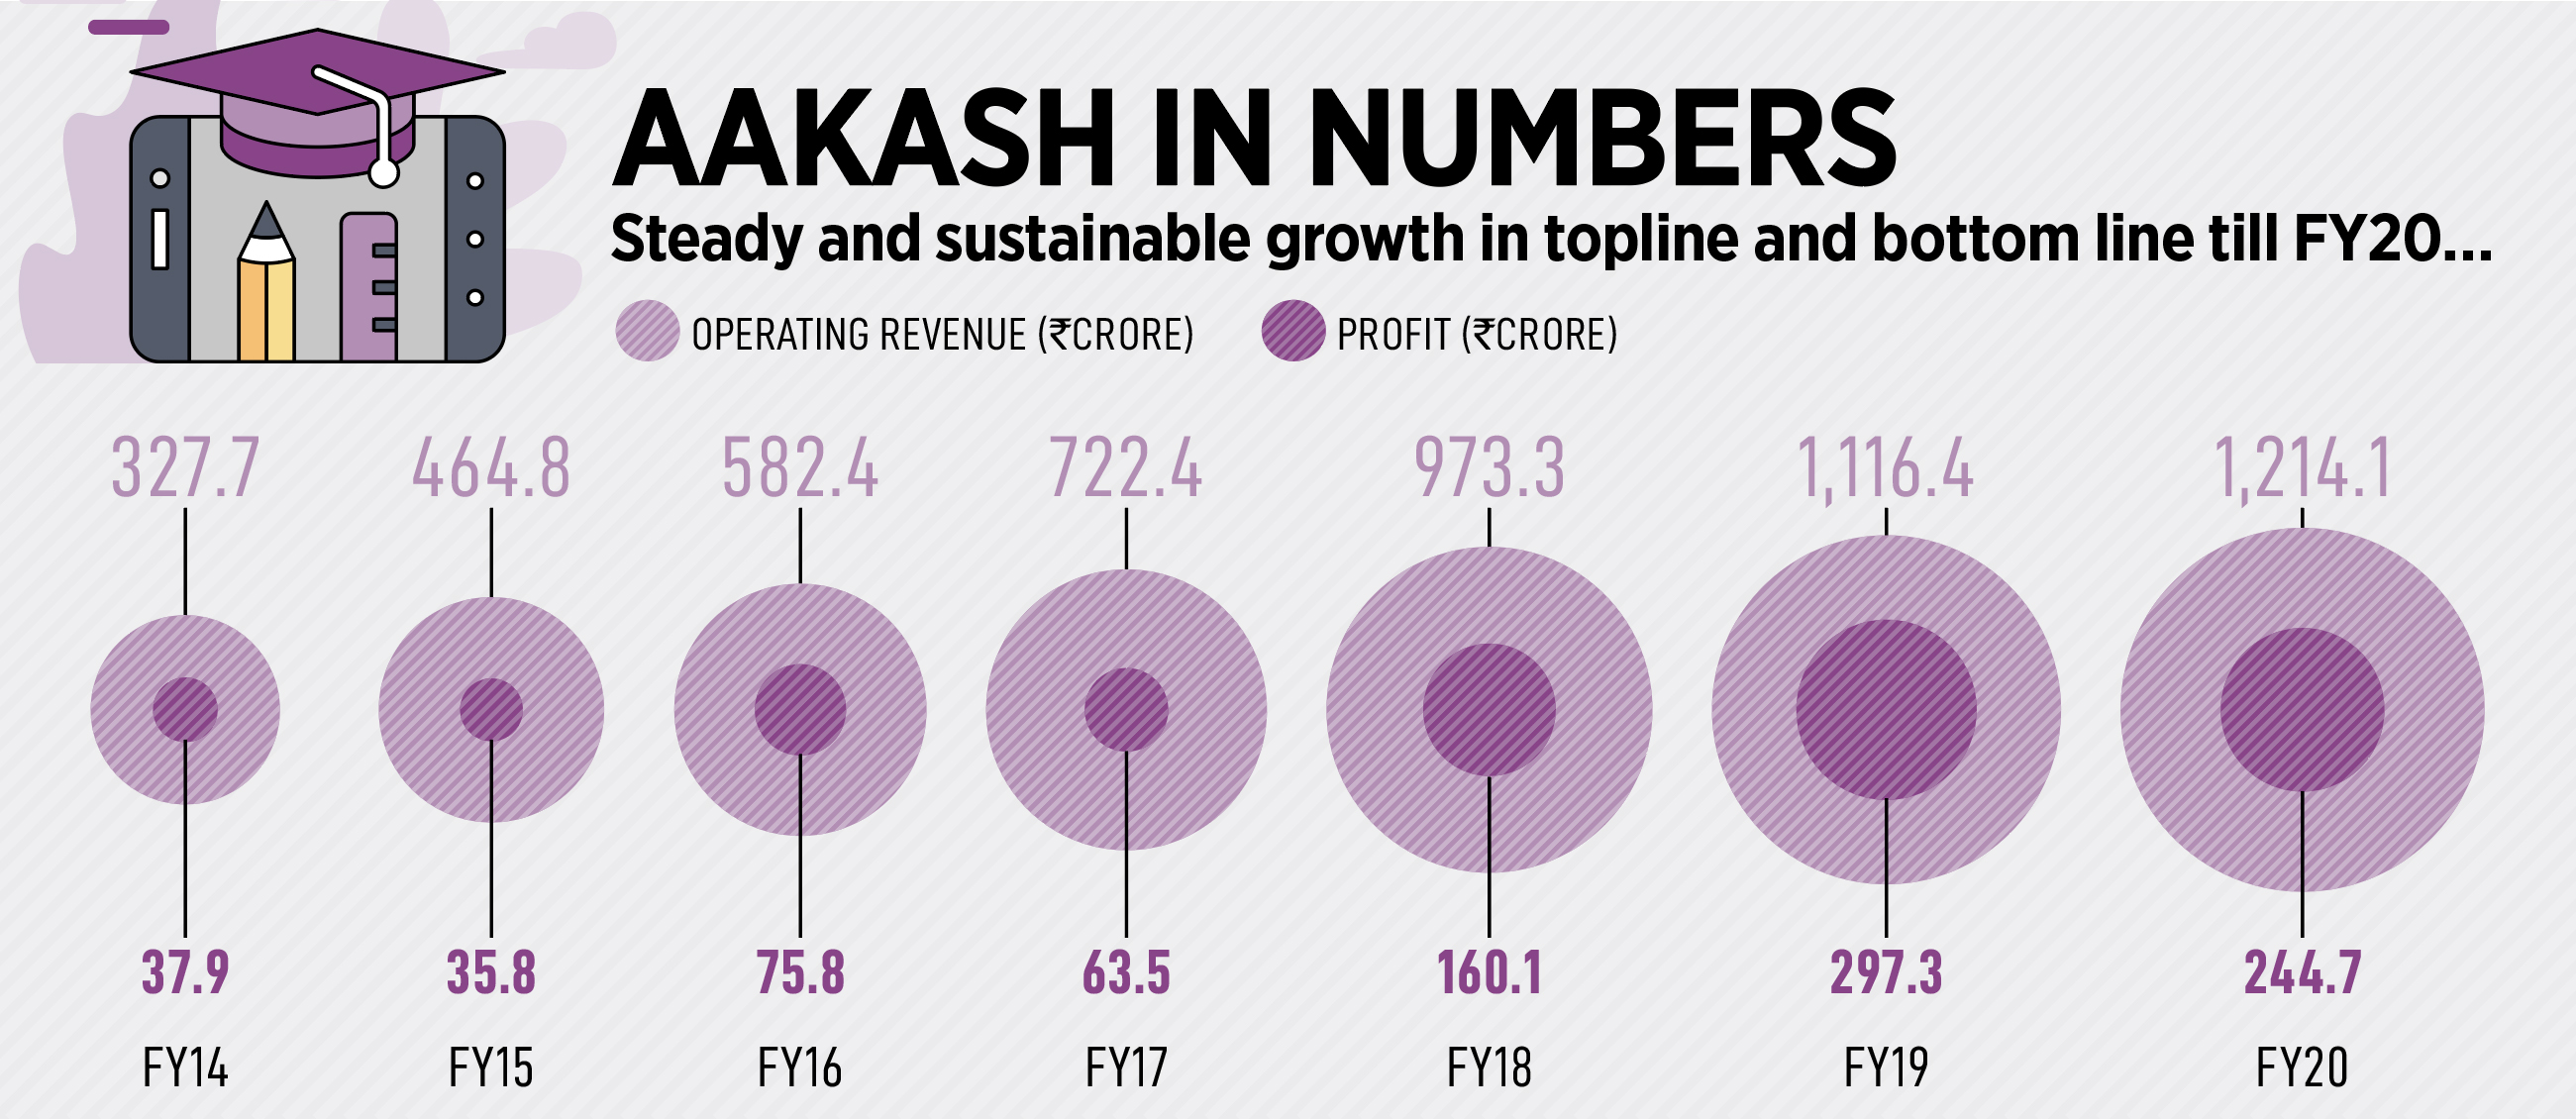 Aakash IPO: Is it a well-timed, smart move for Byju's?